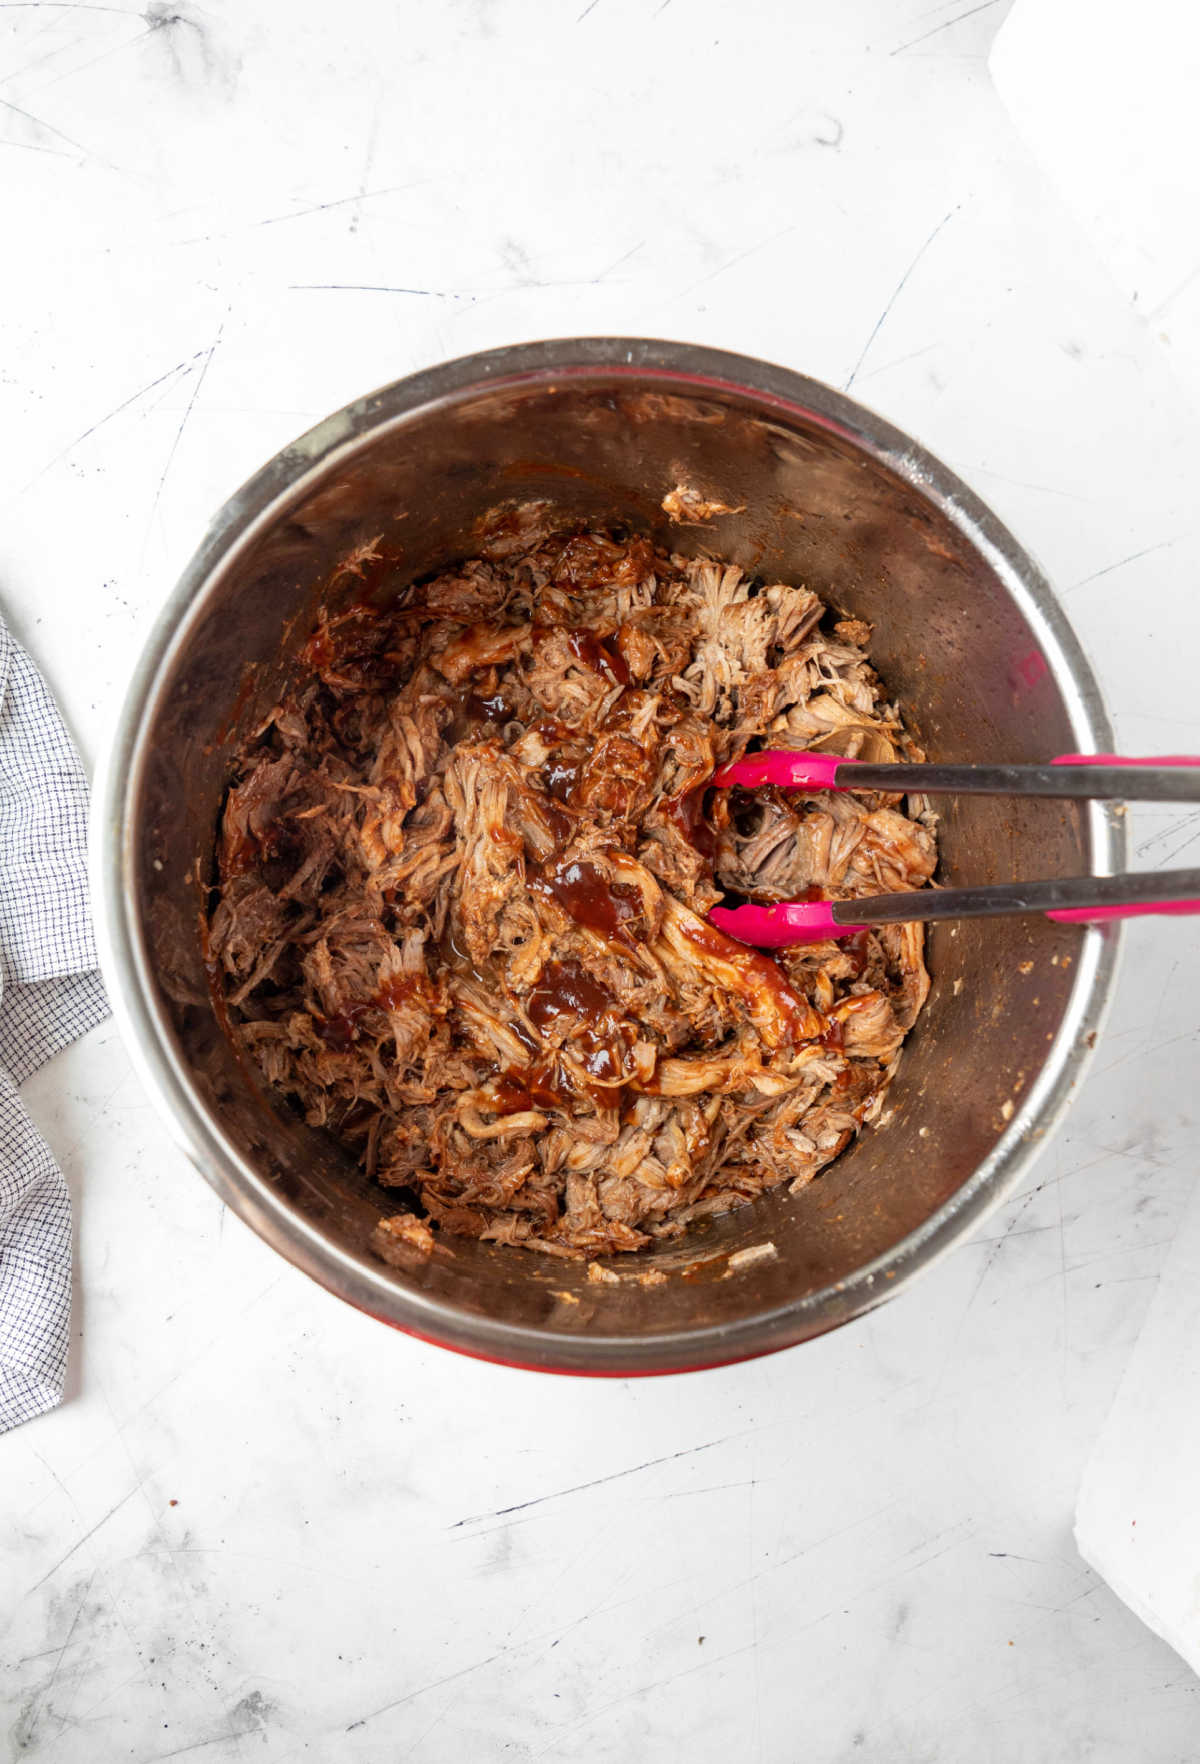 Shredded pulled pork with barbecue sauce in an instant pot inner pot. 